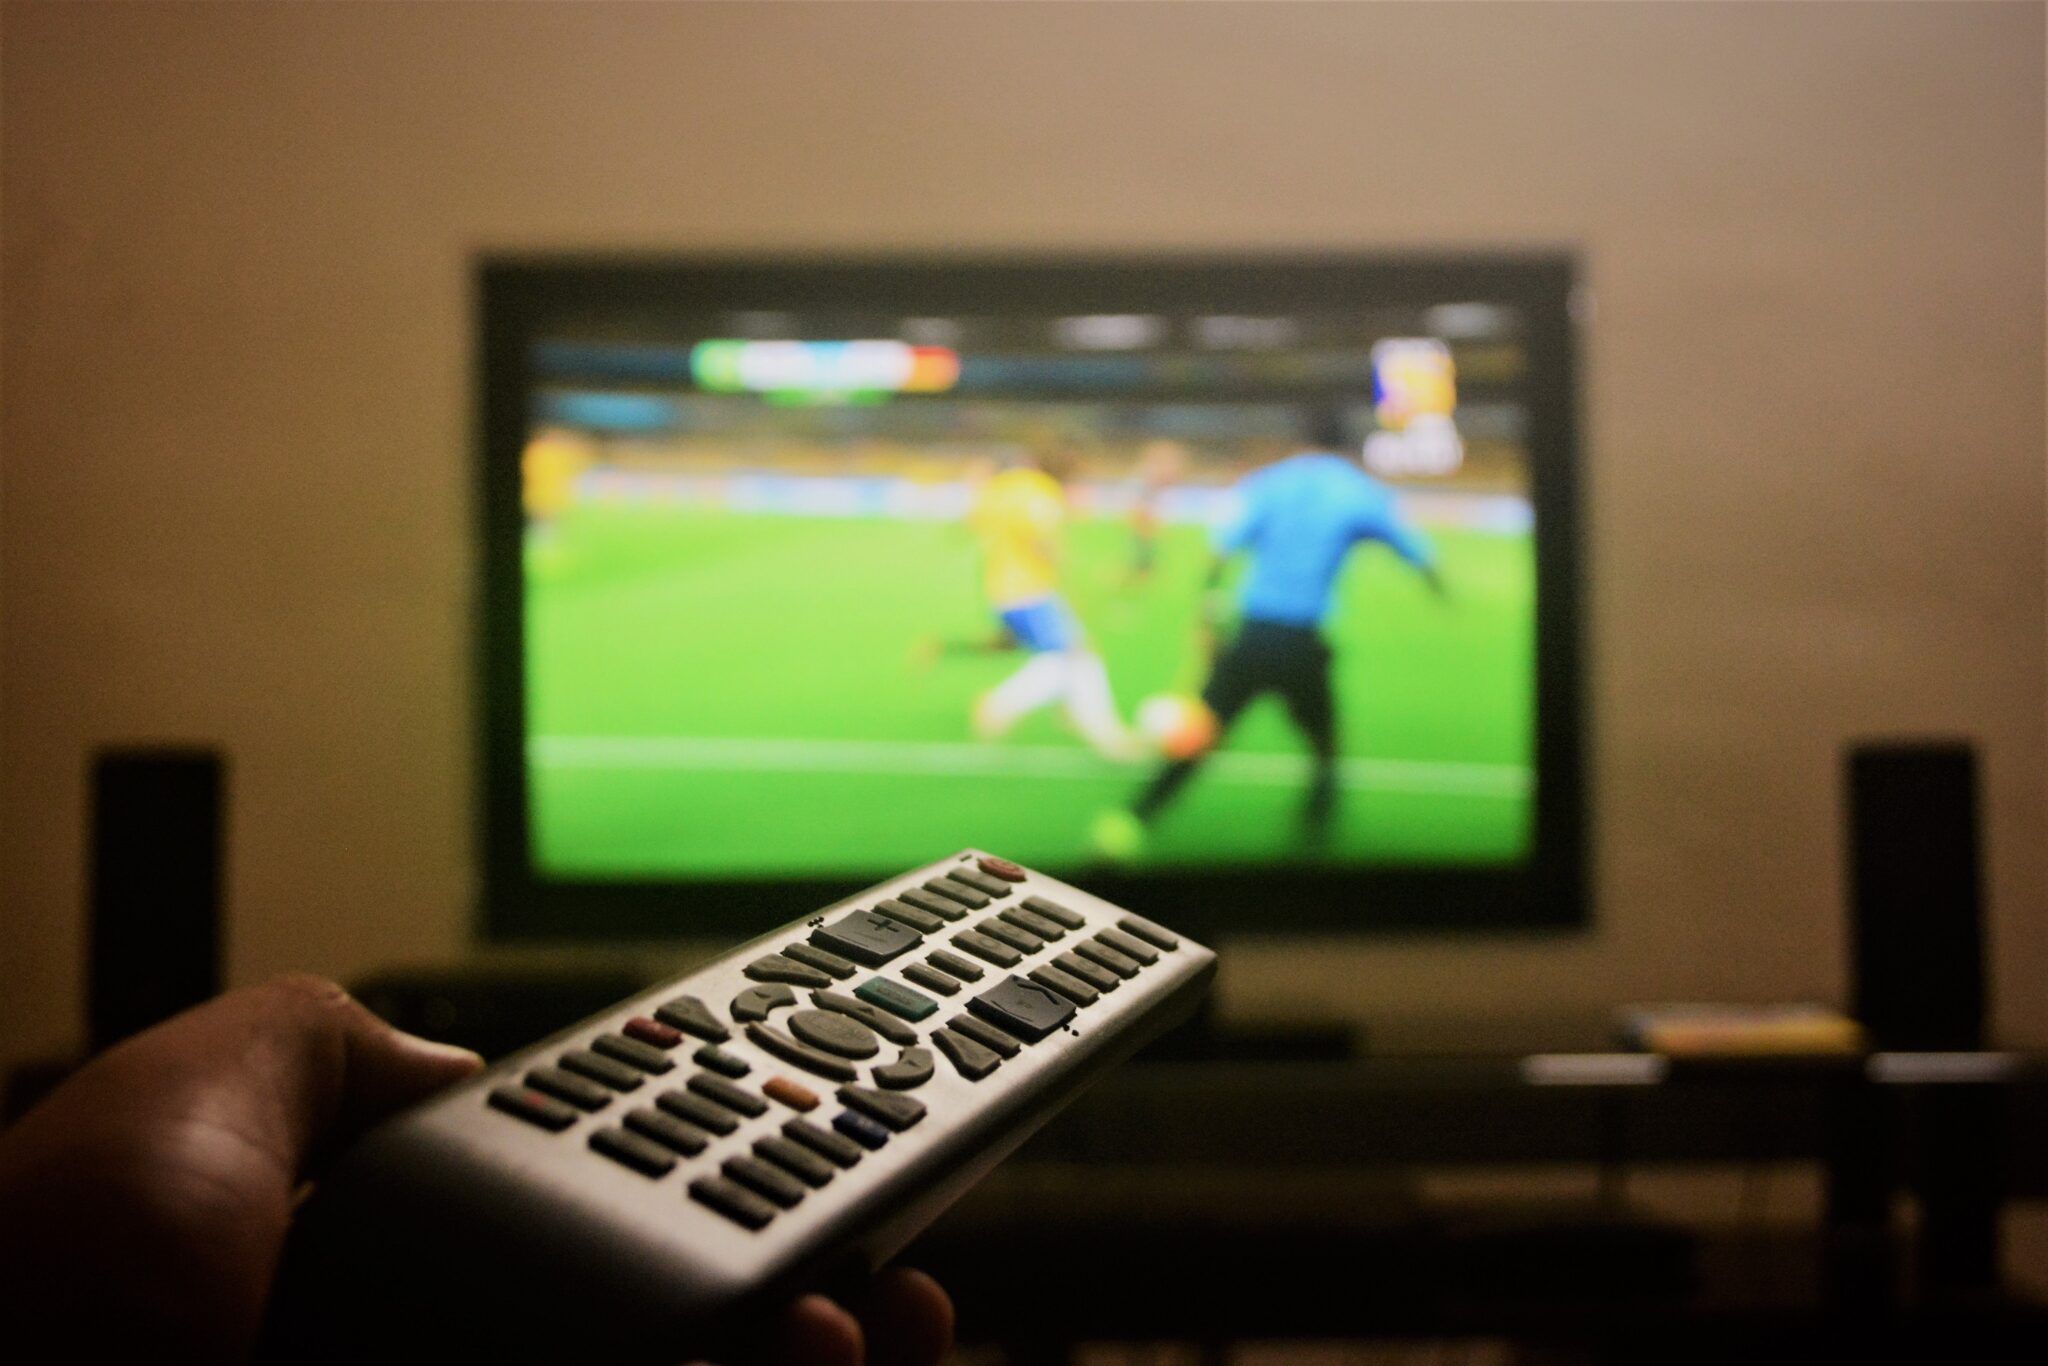 Close up on television remote control with a blurred television set in the background. A soccer game can be seen on the set.